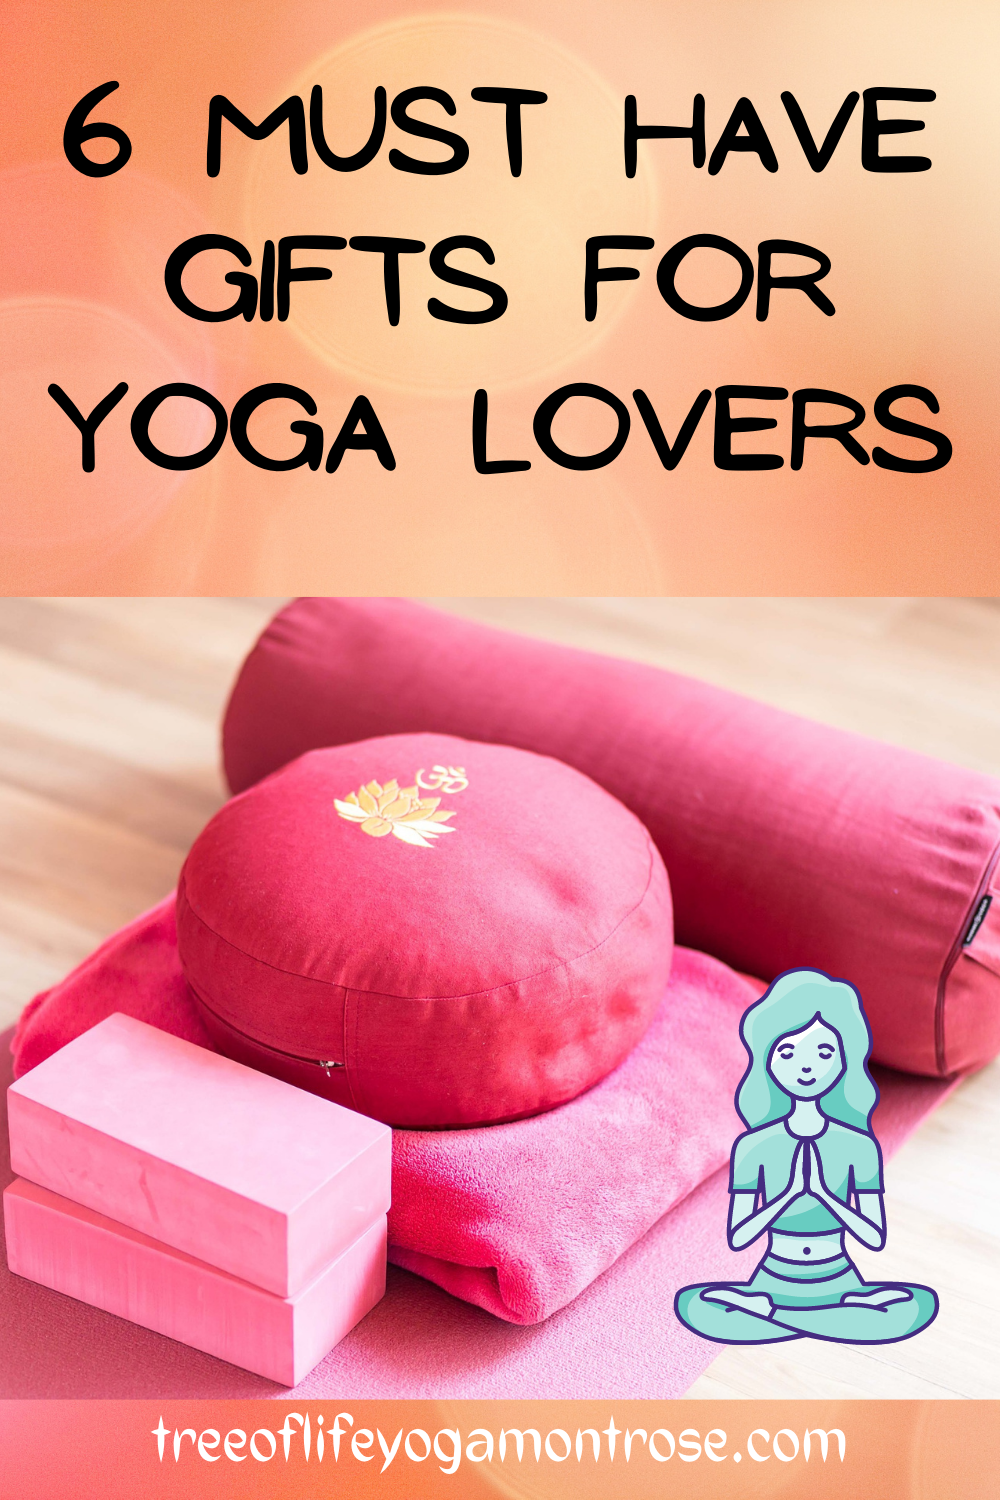 12 Gifts For Yoga Lovers - Unusual Gifts